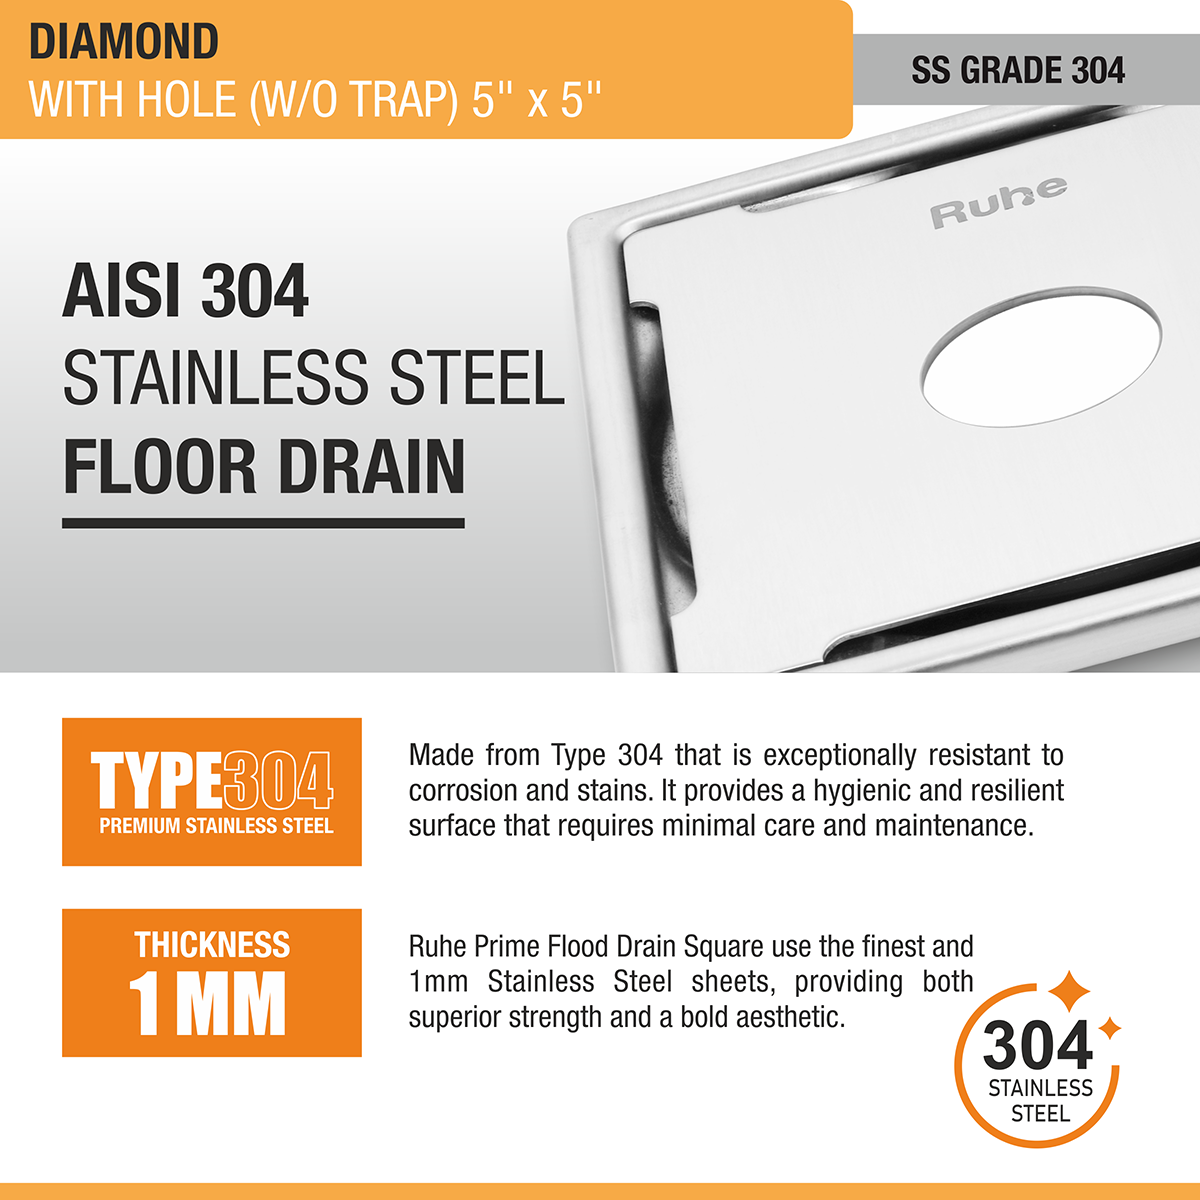 Diamond Square Floor Drain (5 x 5 Inches) with Hole (304 Grade) stainless steel